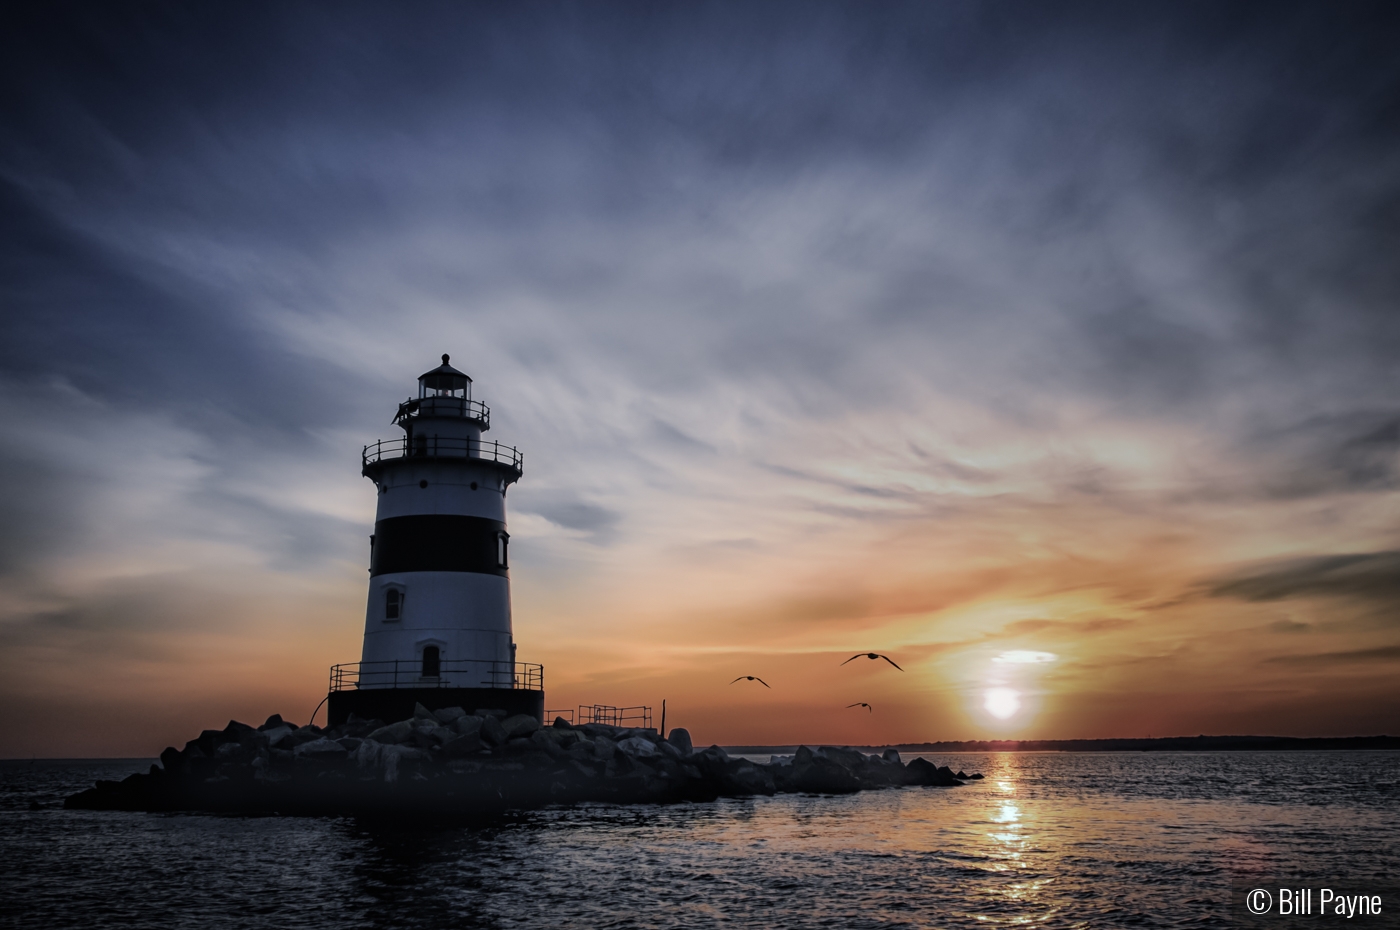 Passing Latimer Reef Lighthouse at Dusk by Bill Payne